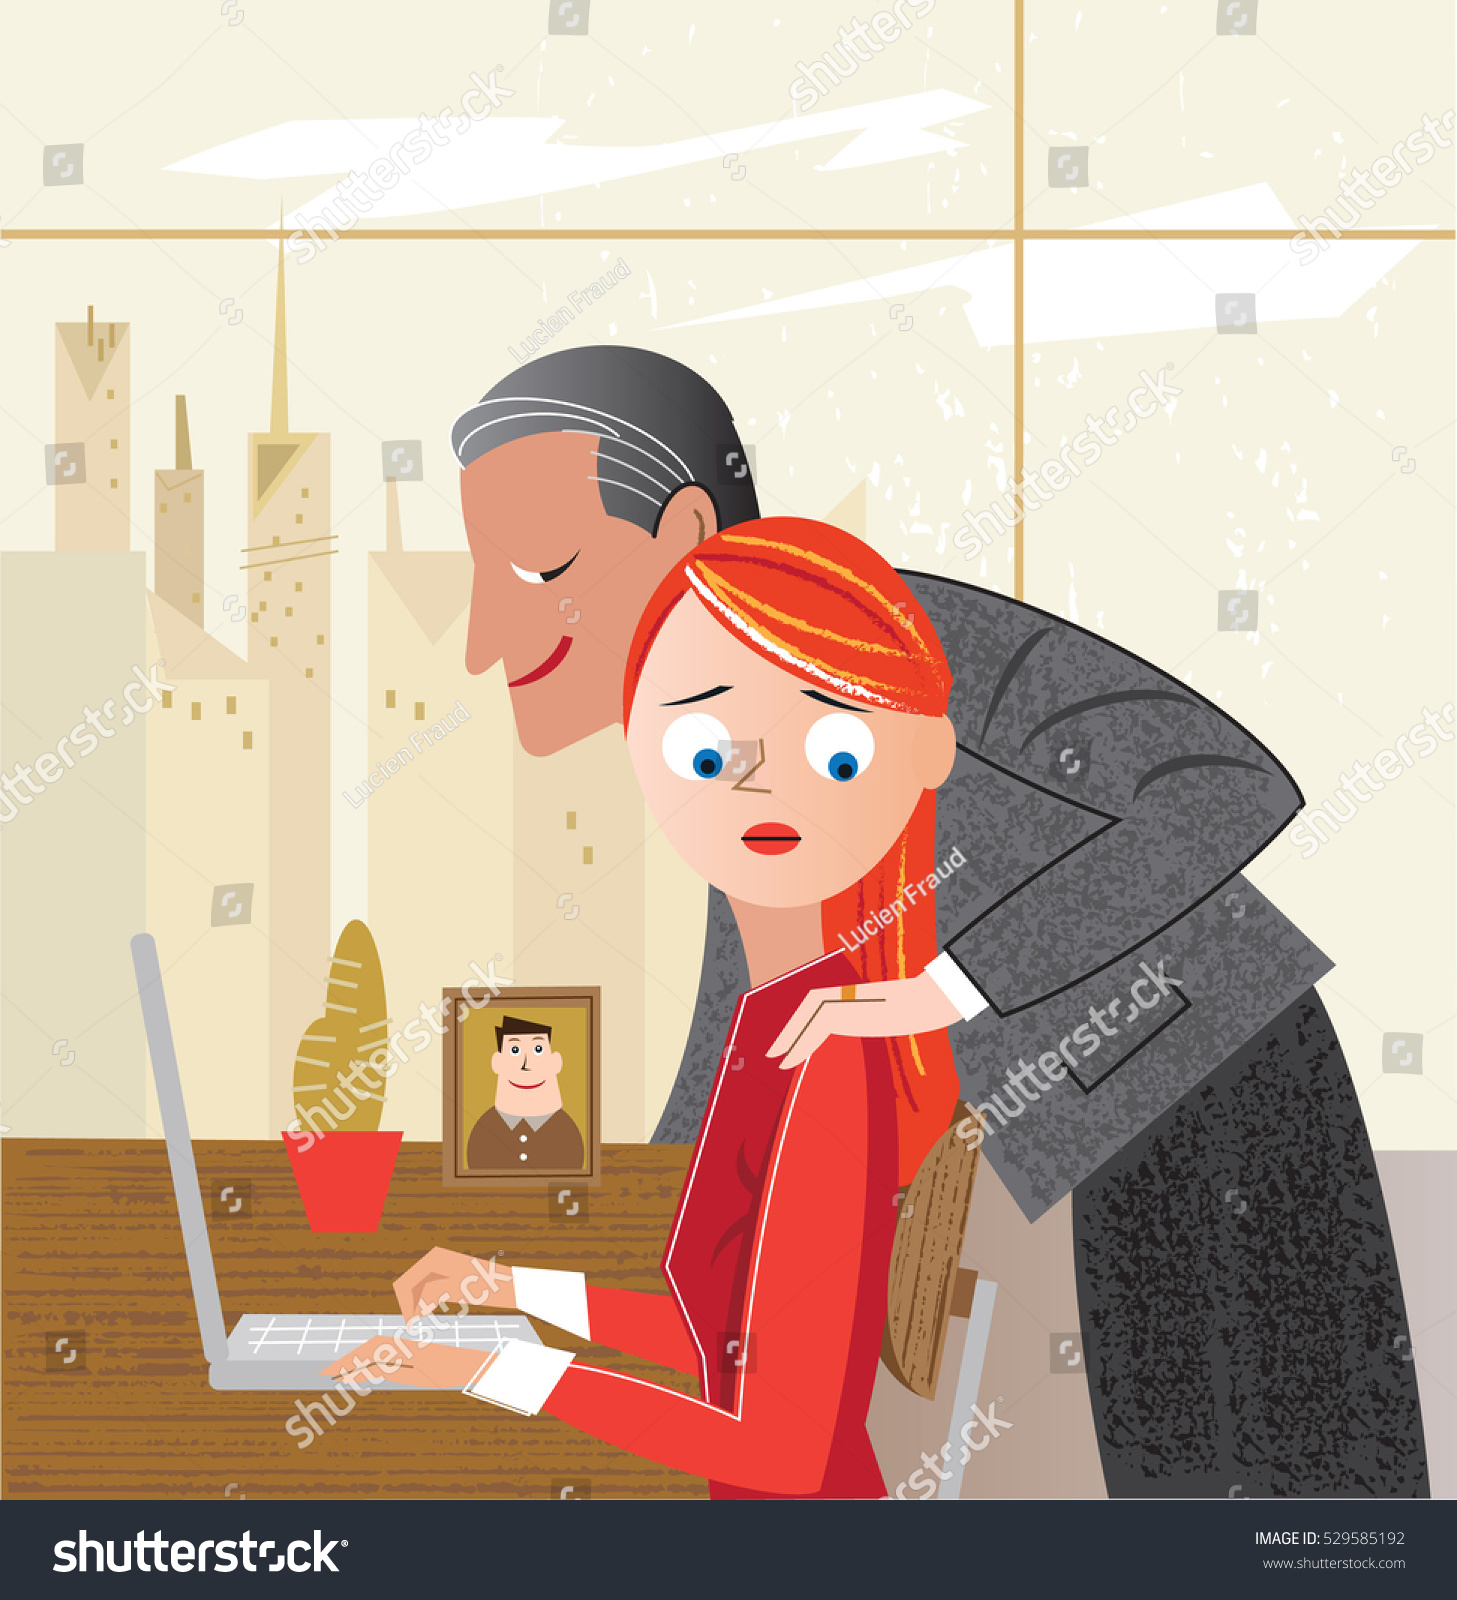 Sexual Harassment In Workplace Stock Vector 529585192